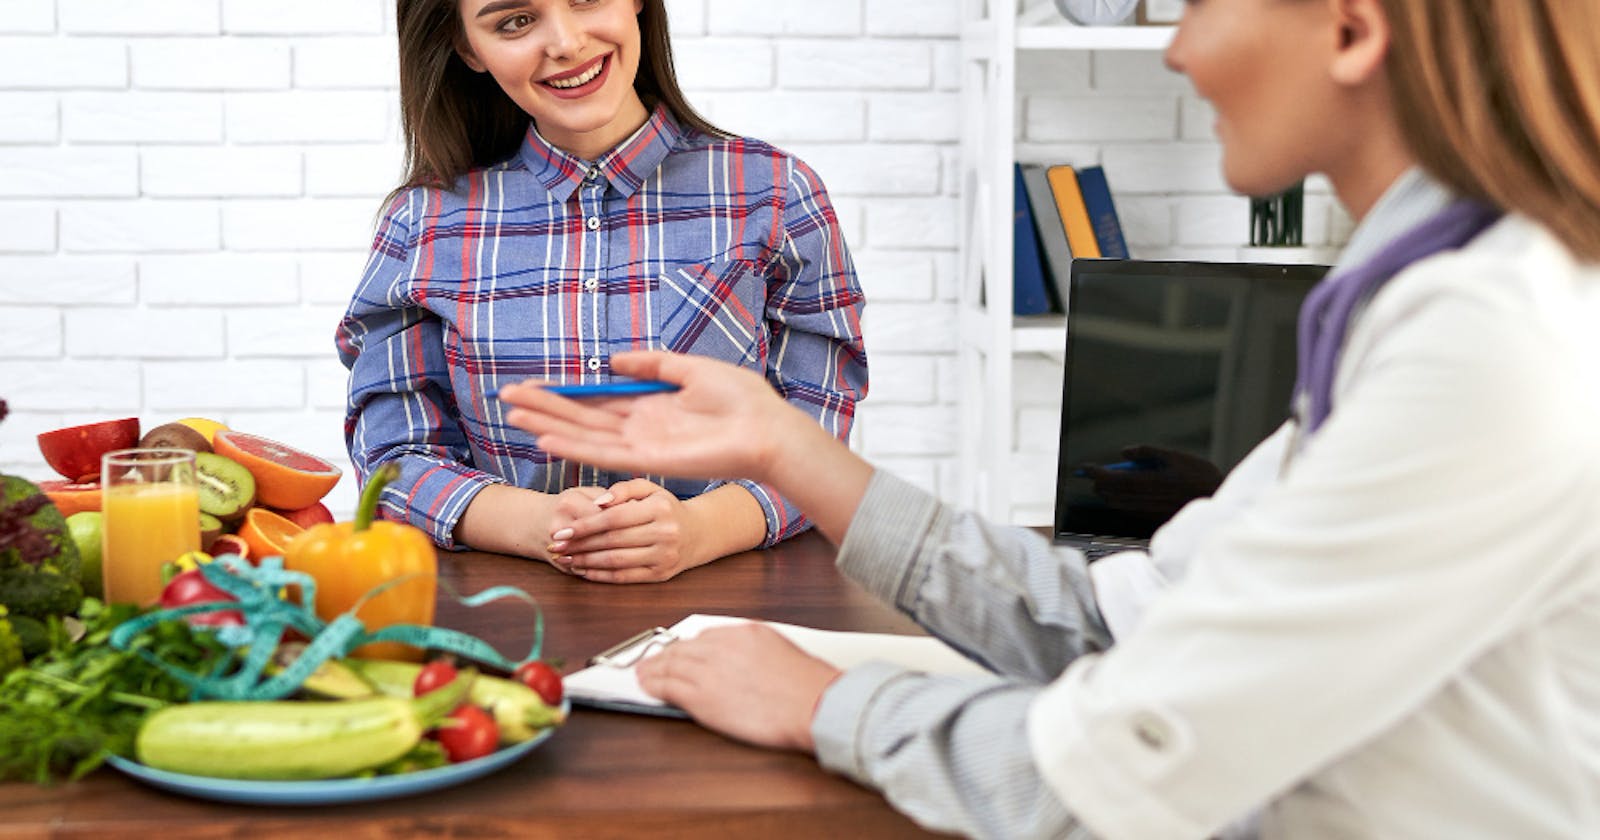 Nutrition Counselling For Individuals With Eating Disorders